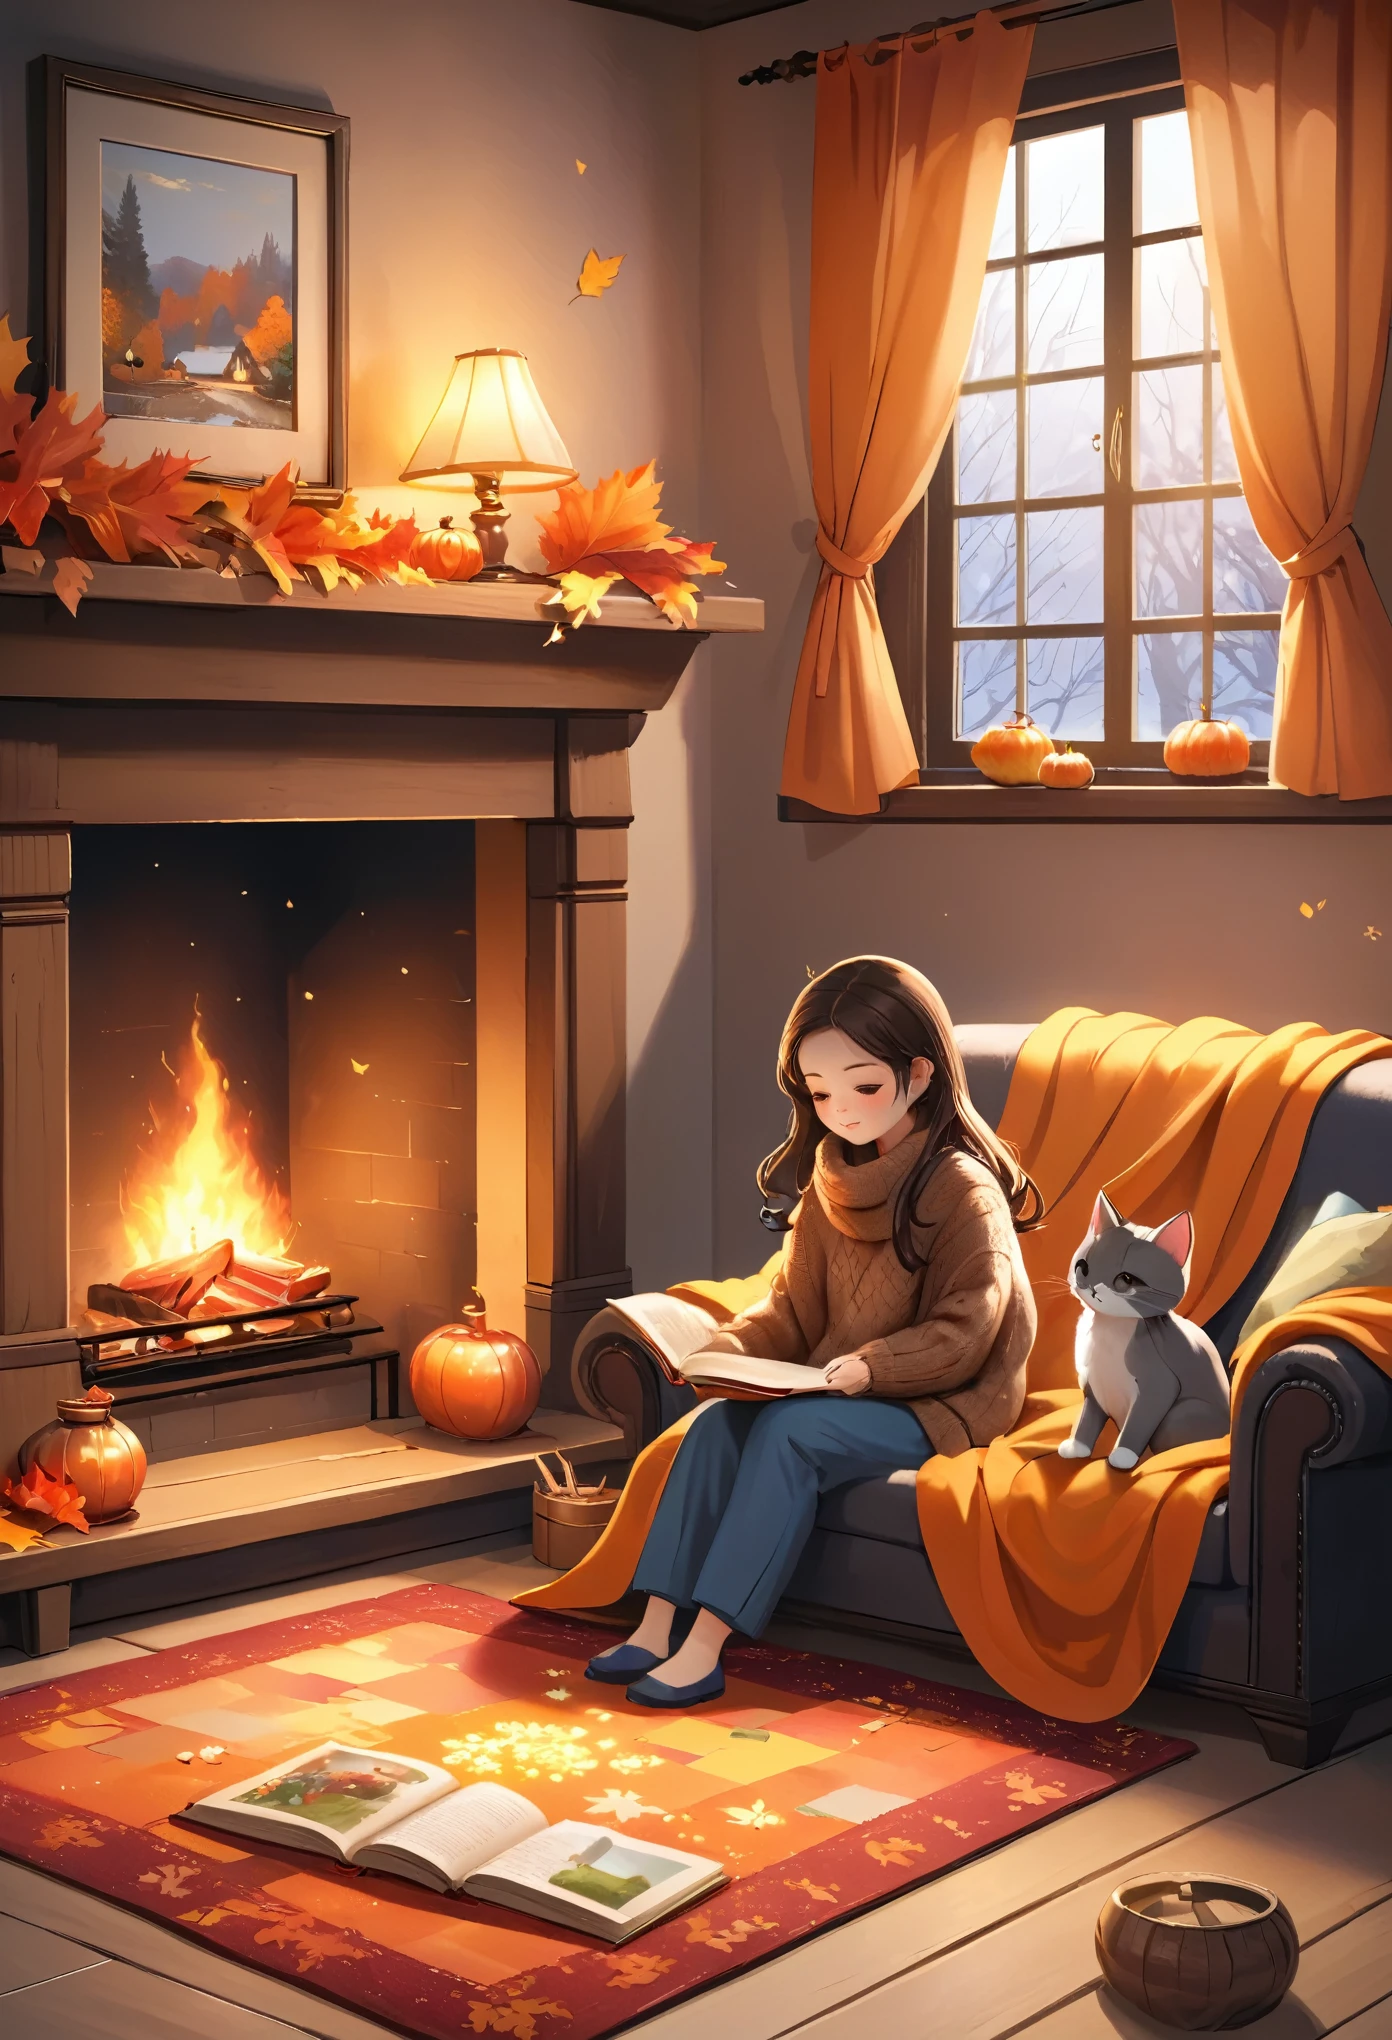 Warm wooden living room。The large stone fireplace is lit with firewood.、The flickering orange flames emit a warm light.。A colorful patchwork rug is laid out in front of the fireplace.、A girl wrapped in a blanket is sitting on it.。The girl has long brown hair、Wearing a hand-knitted sweater and leggings。She picked up an old picture book、Turning the pages。Next to it、A small grey cat sleeping curled up with its face buried in the edge of a blanket。
Outside the window、The last leaves of autumn flutter in the wind、The signs of winter are gradually beginning to appear。Fallen leaves paint the ground colorfully.、Distant Tree々is beginning to shed its leaves。Handmade autumn wreaths are displayed in the windows.、Feel the change of seasons。
Family photos and candles are lined up above the fireplace.、A warm light illuminates the room。The crackling of the fireplace、The sound of the cold wind blowing outside、It creates a quiet and peaceful atmosphere。
There is a small wooden bookshelf in the corner of the room.、There are rows of old picture books and handmade dolls.。At the feet of the girl、Cat toys scattered all over the place、I can see traces of play。
The girl&#39;s expression is calm.、sometimes、You can see her gently stroking the cat.。The cat makes a small purring sound each time, looking pleased.。The whole room is filled with warm light and a sense of security.、Quiet and calm time passes.。